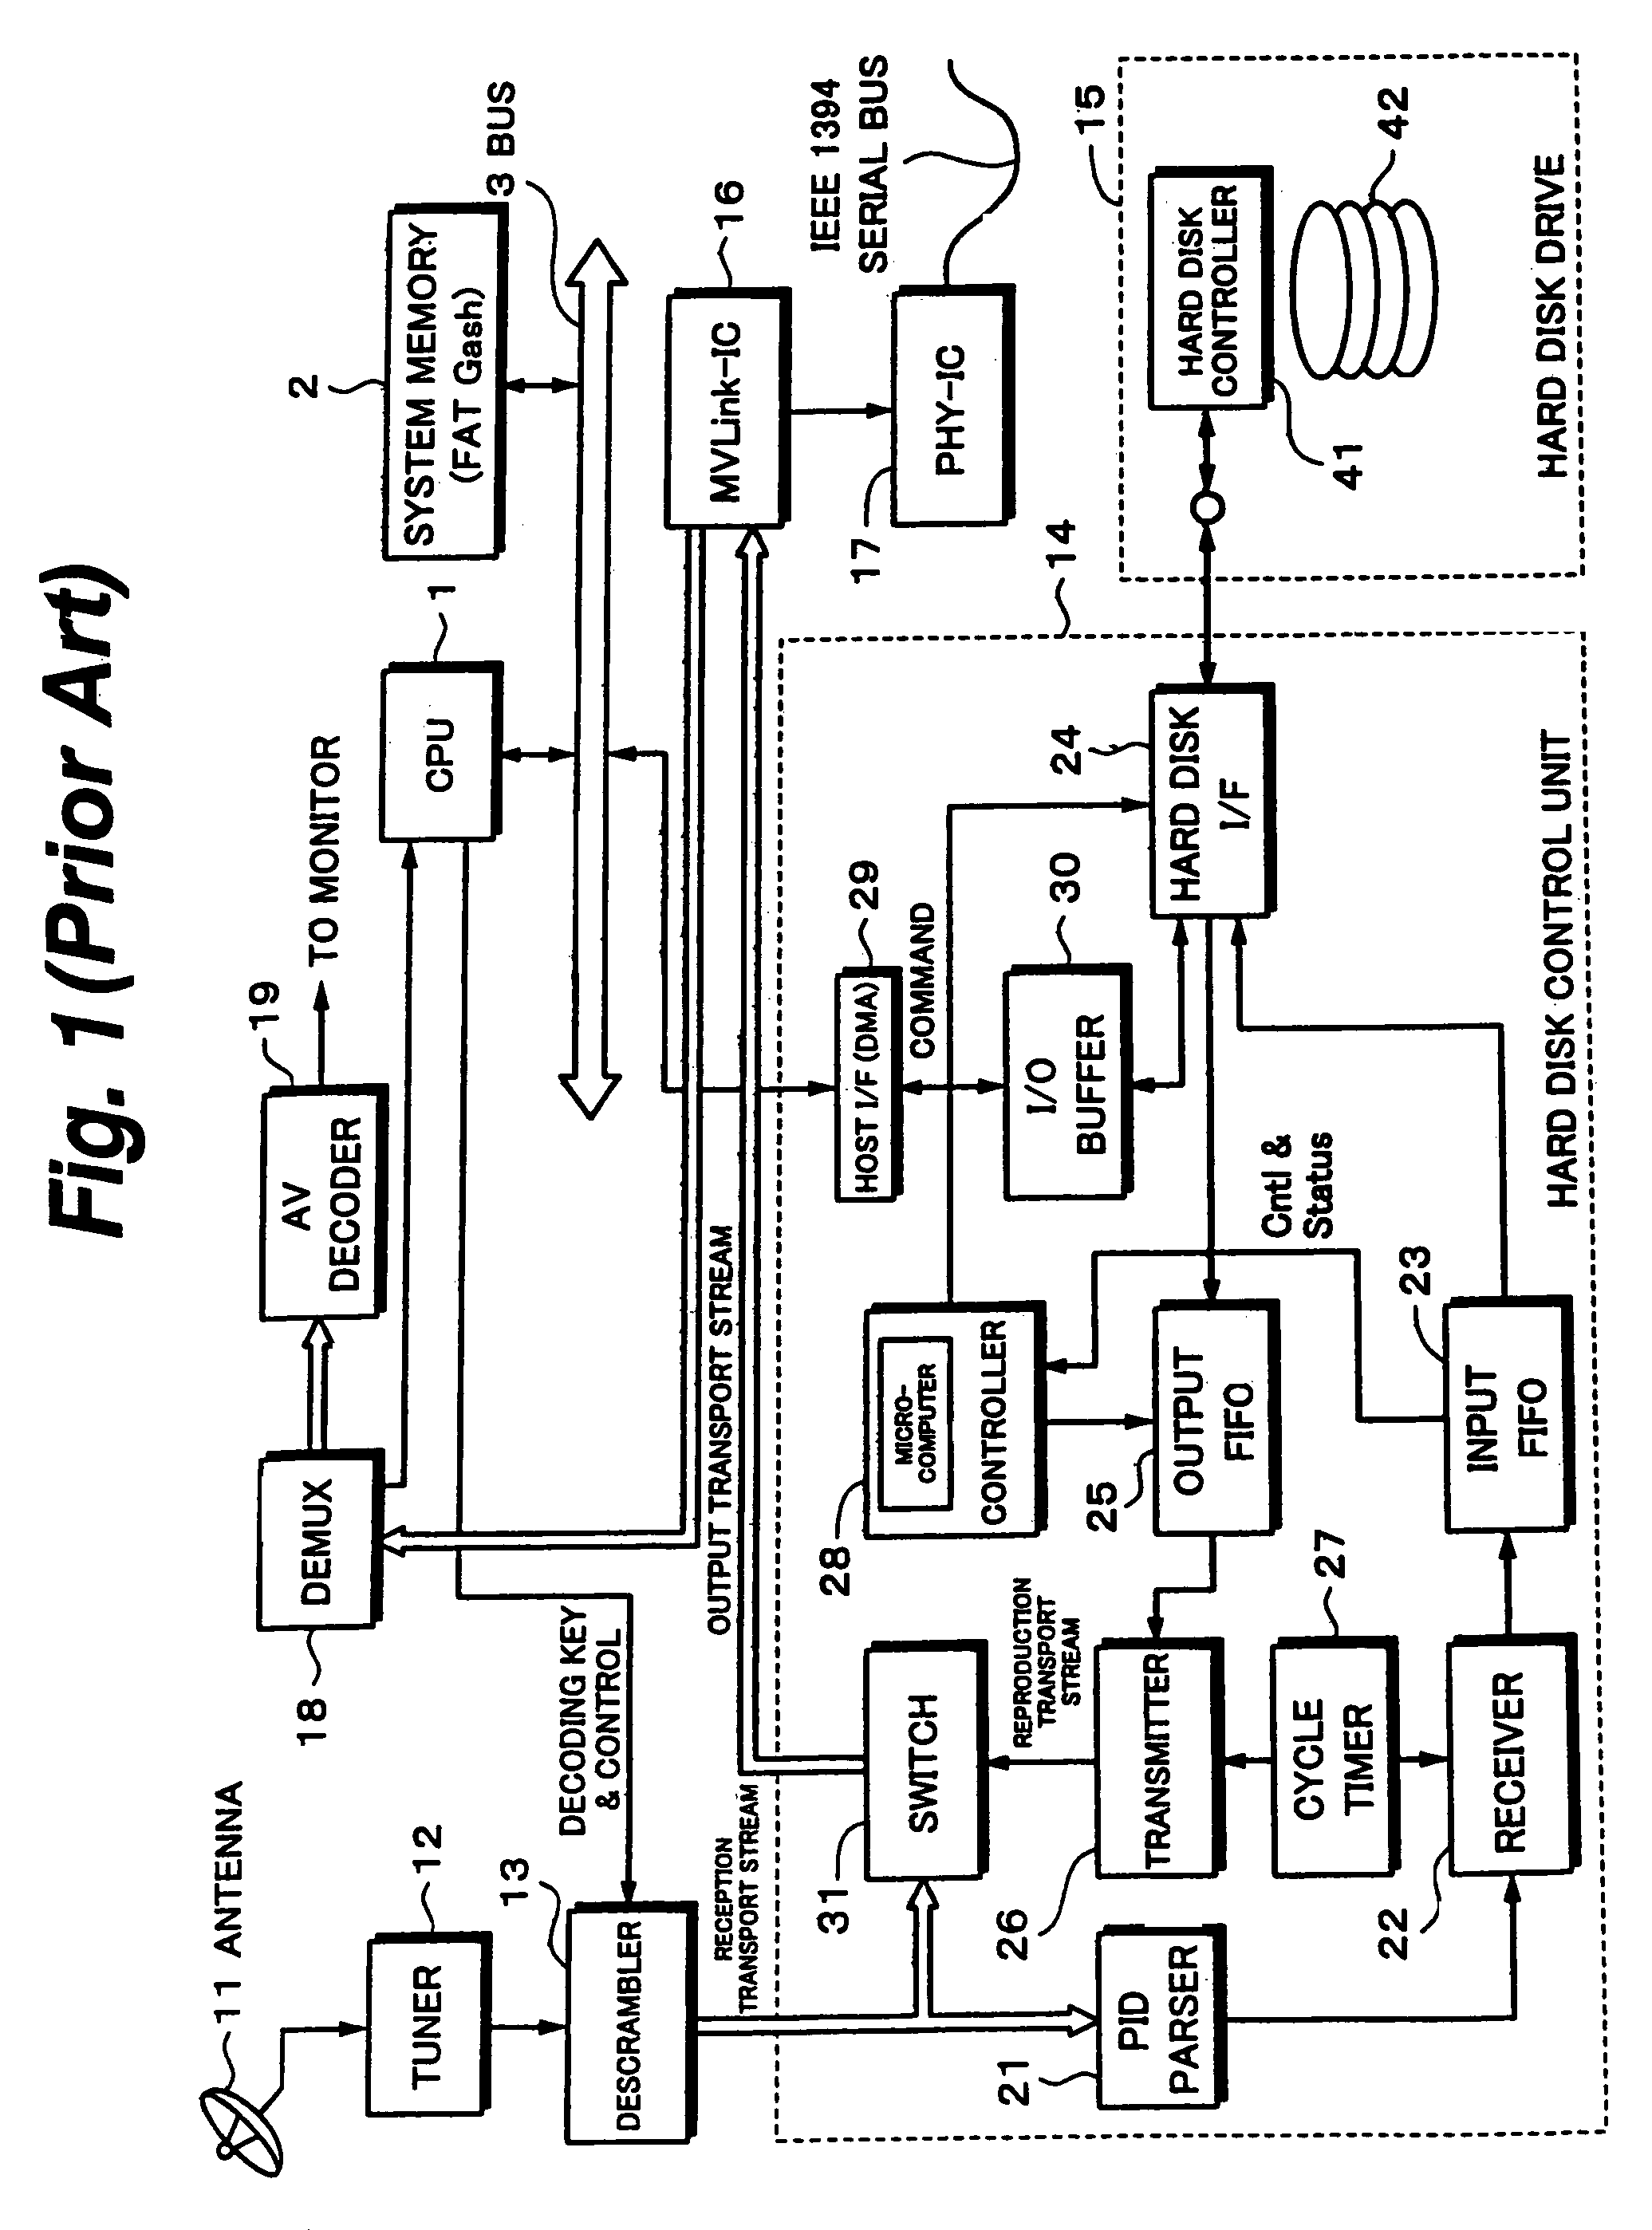 Information processing apparatus and method for handling packet streams